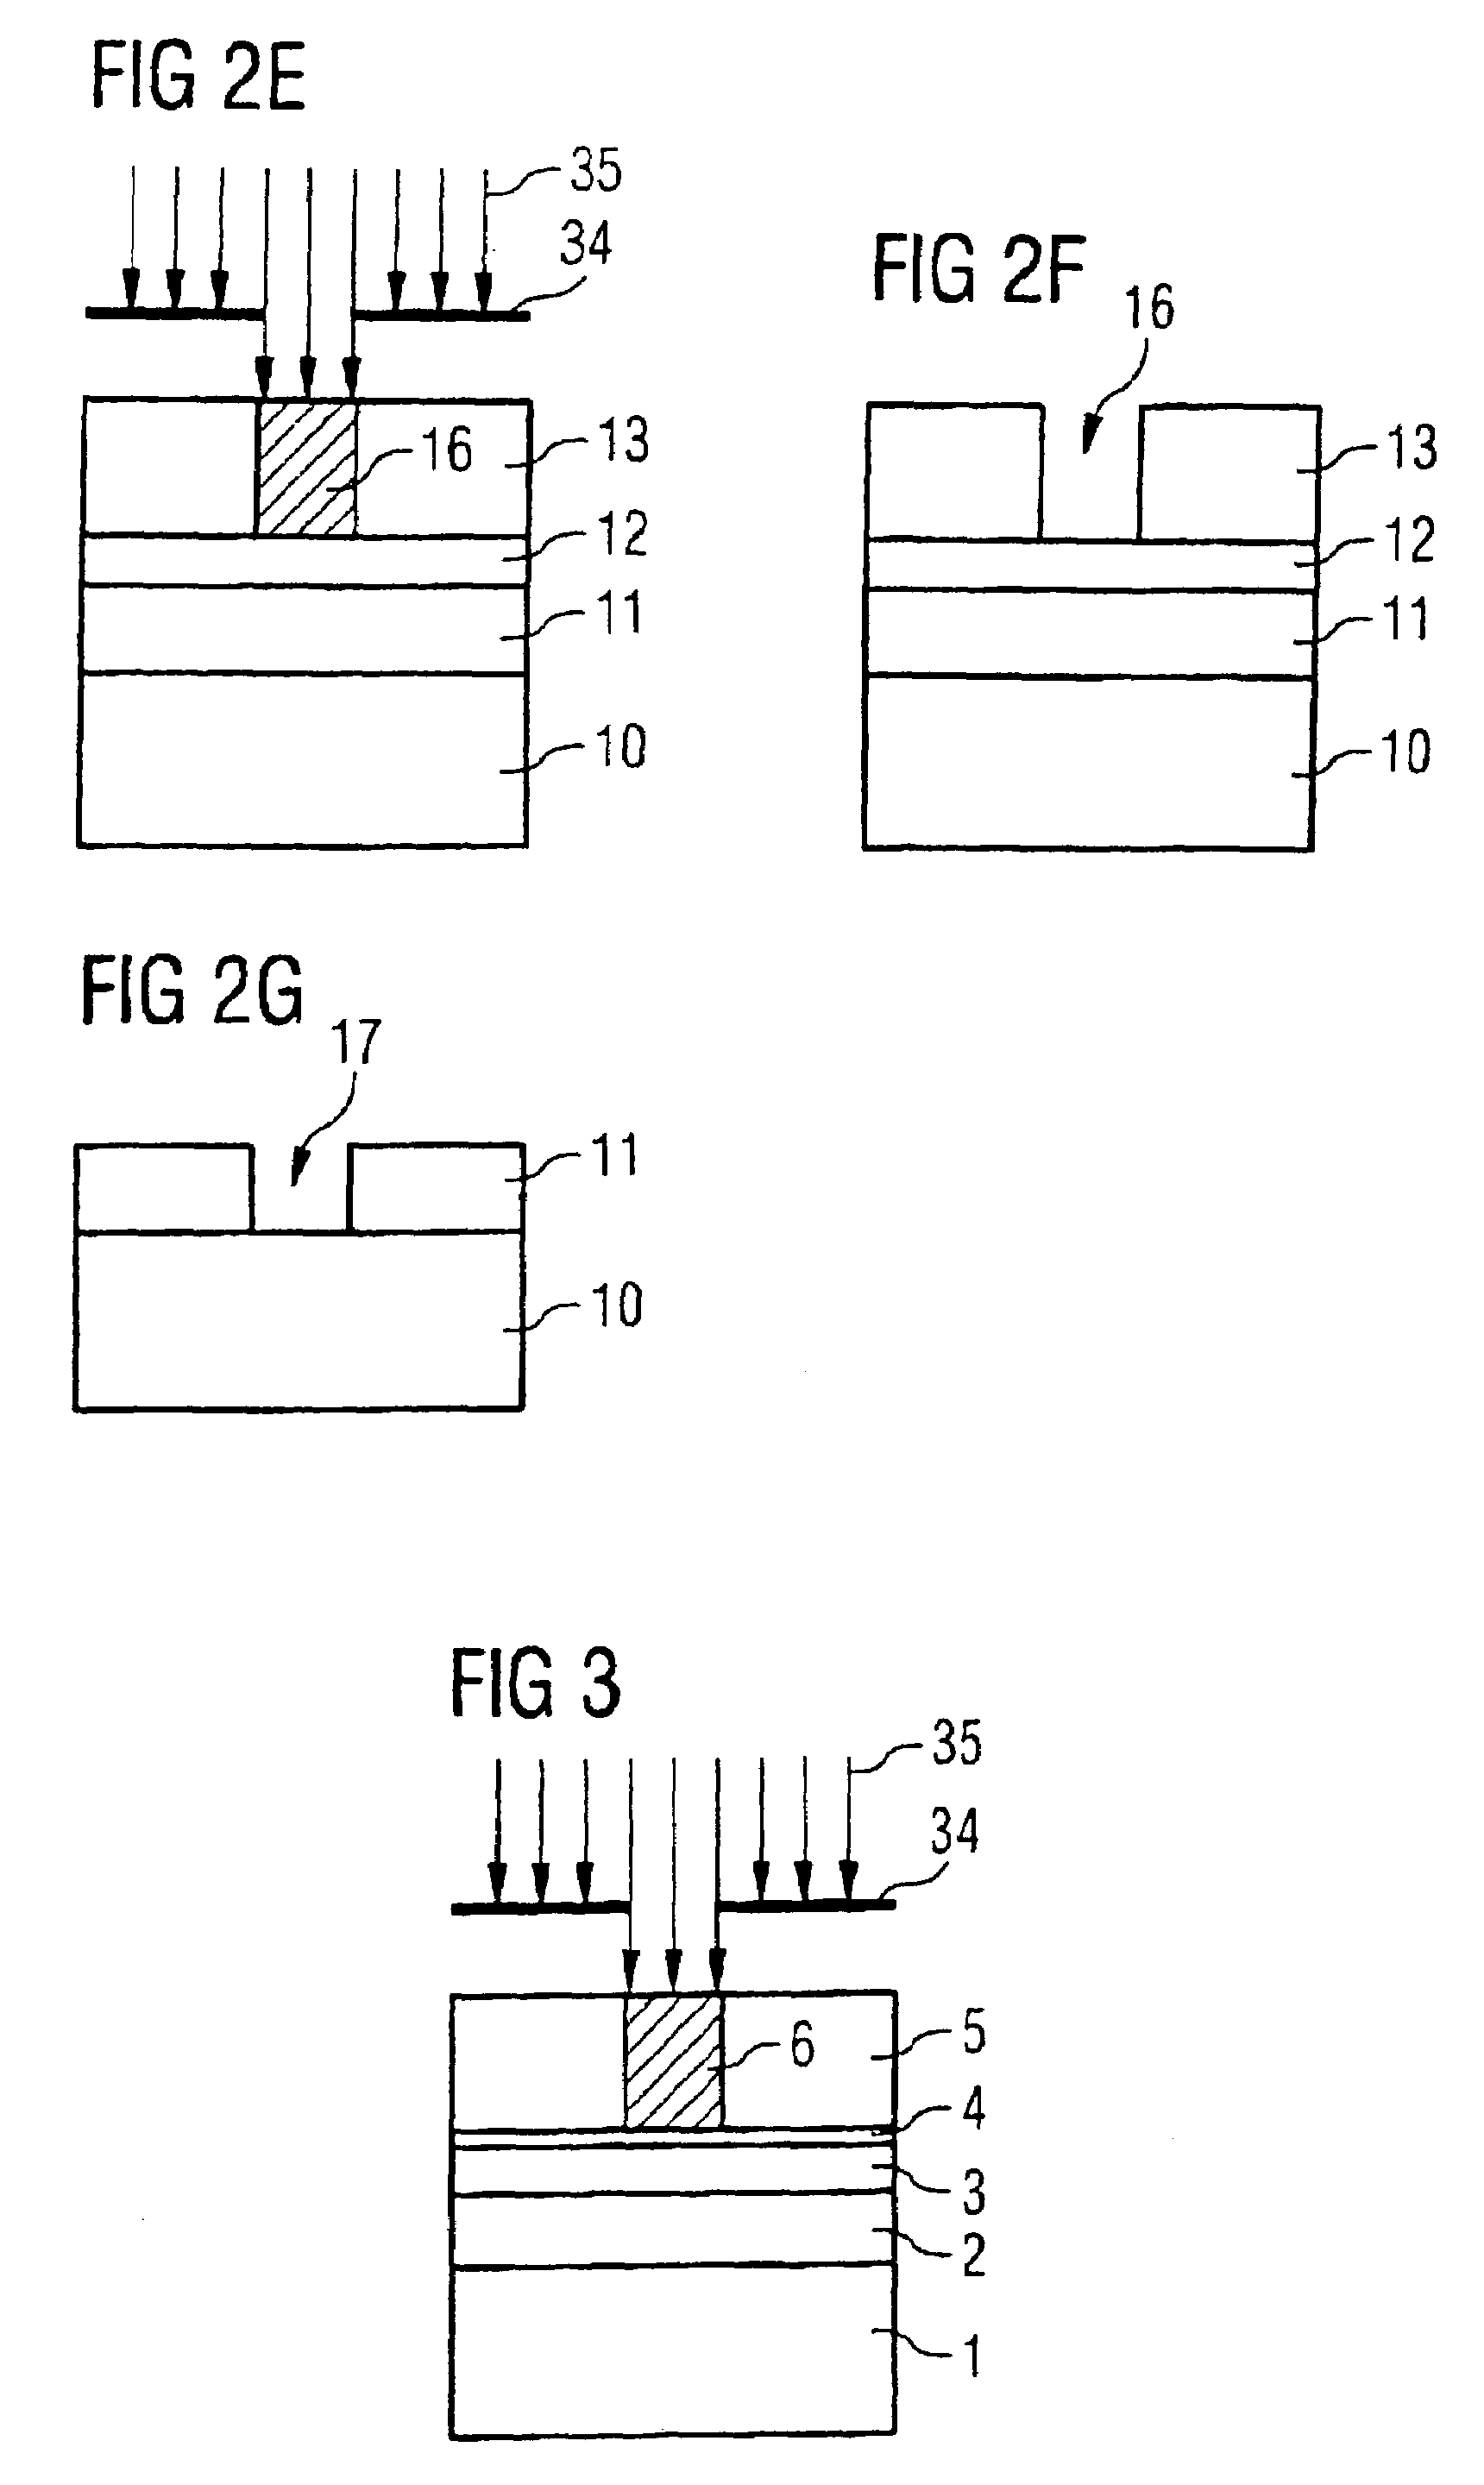 Method for fabricating a patterned layer on a semiconductor substrate